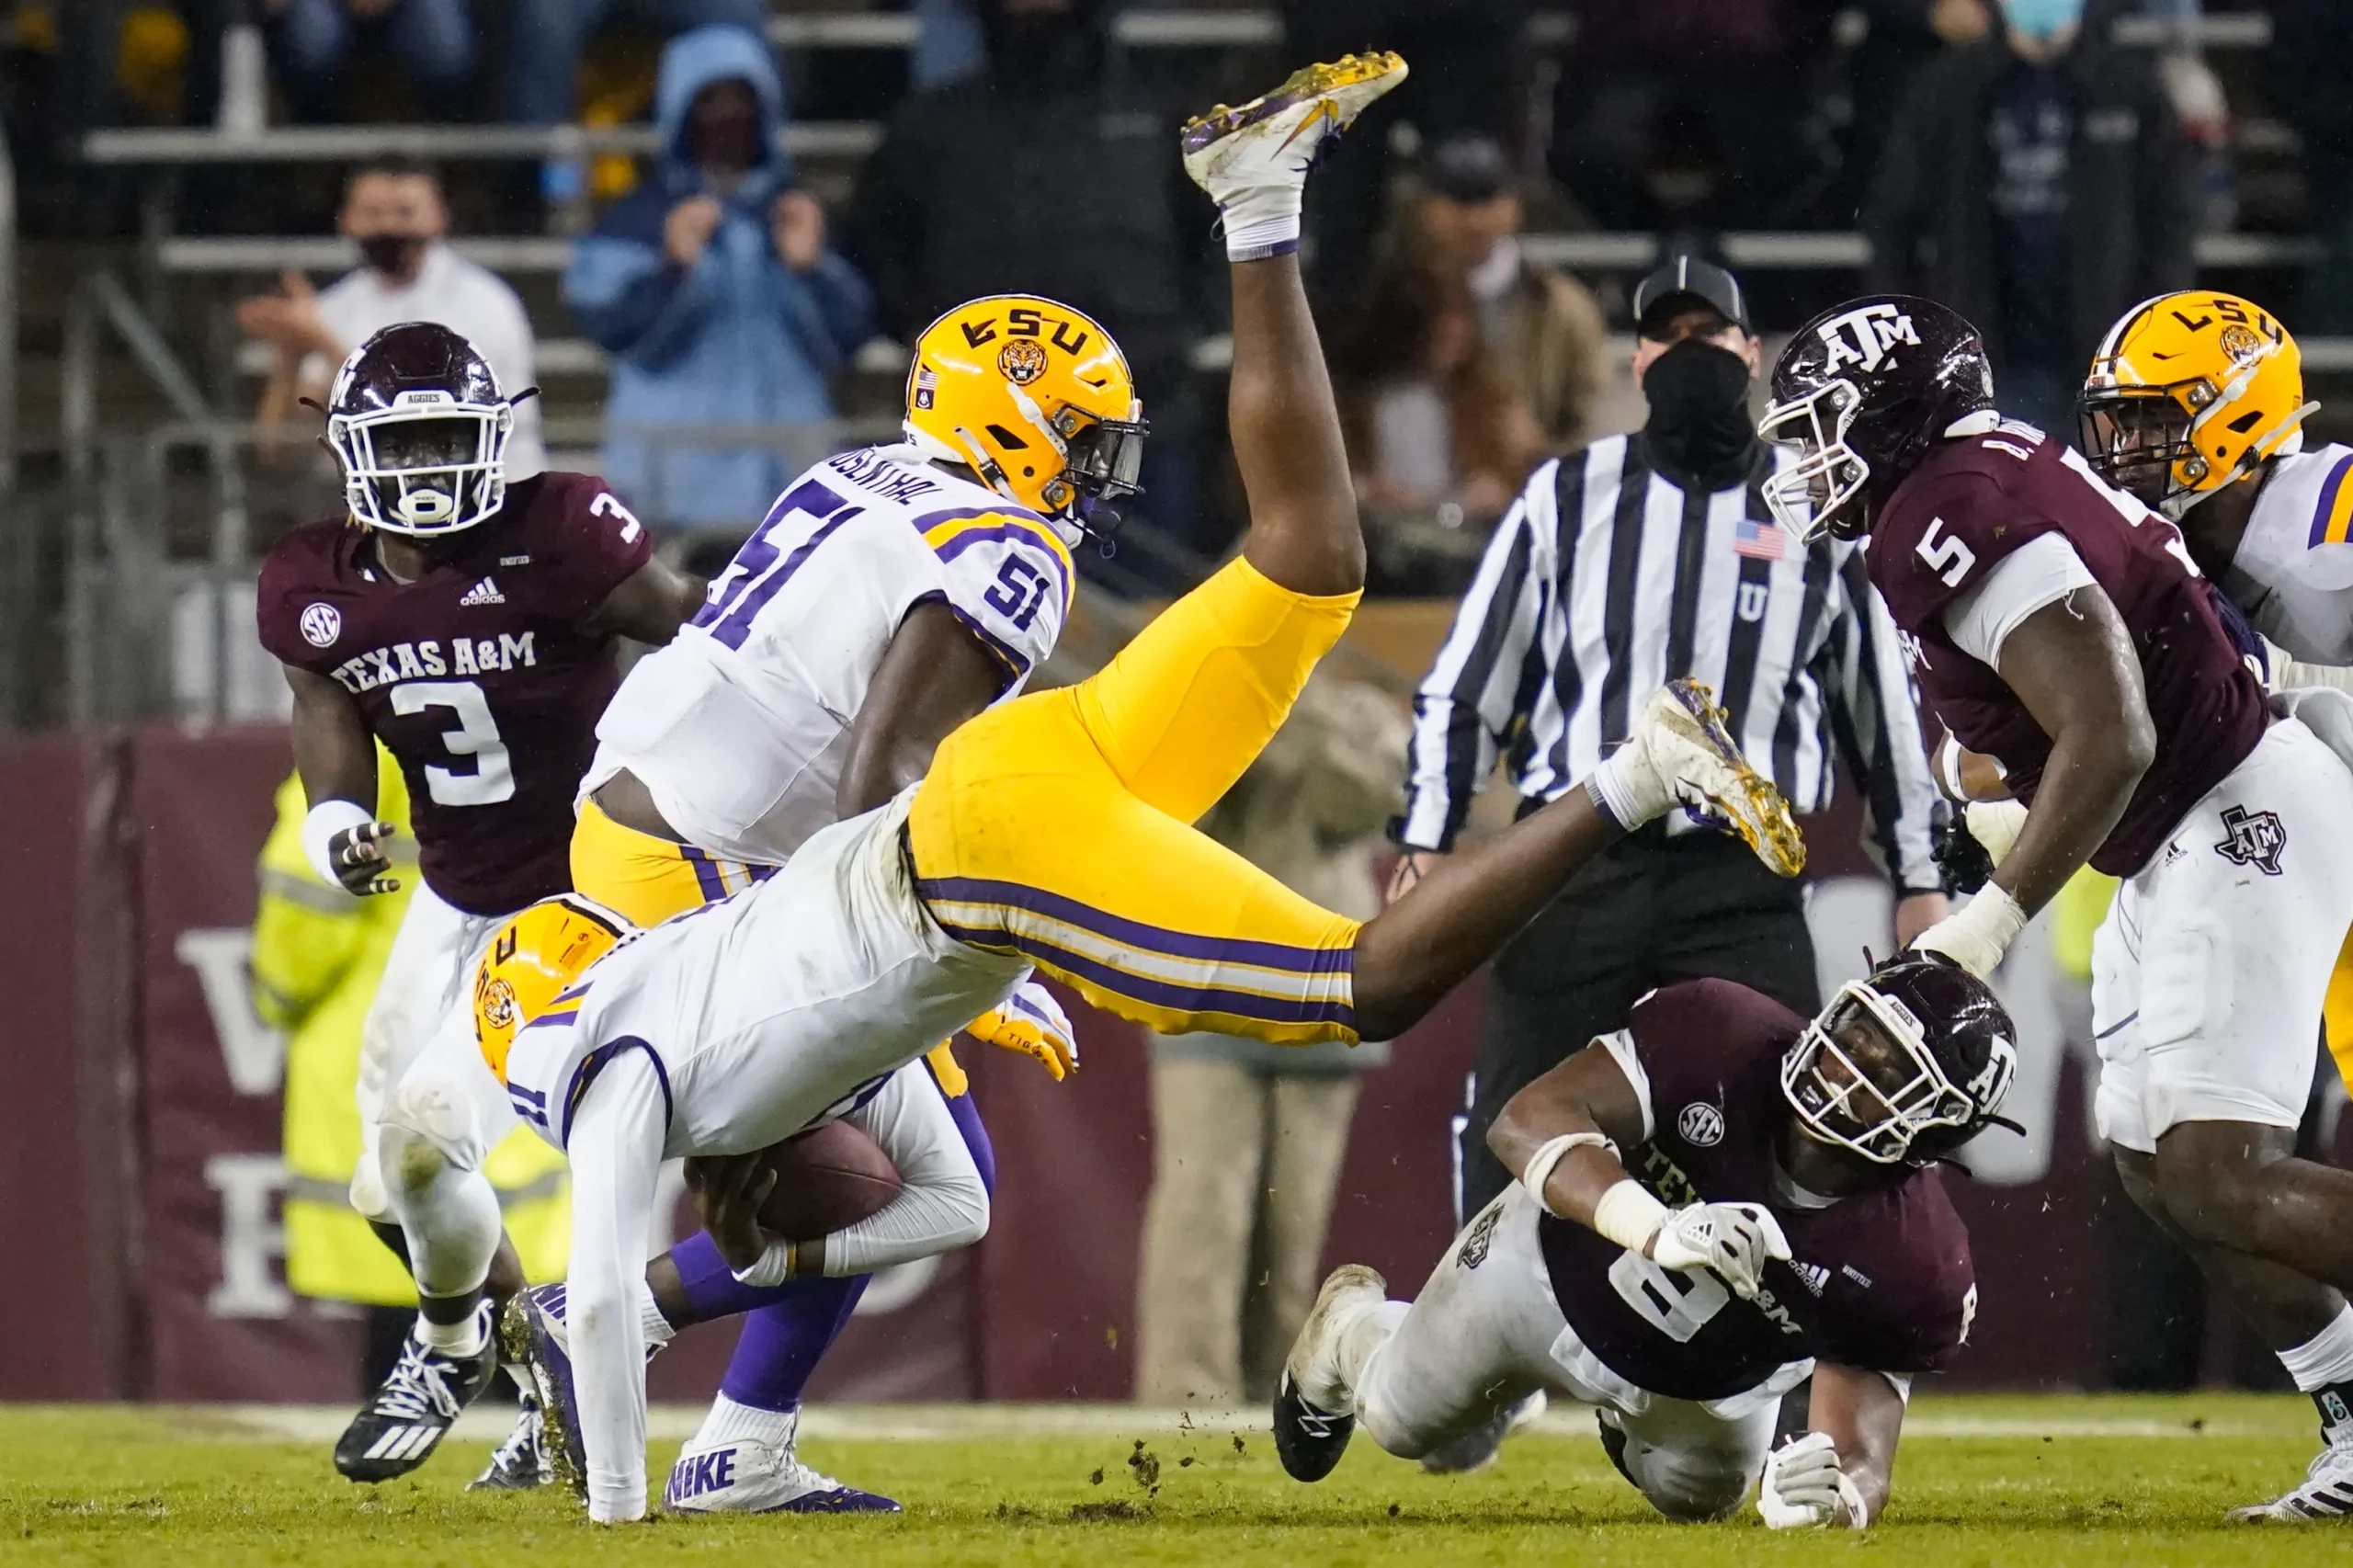 Comparing LSU and Texas A&M: The Ultimate Showdown